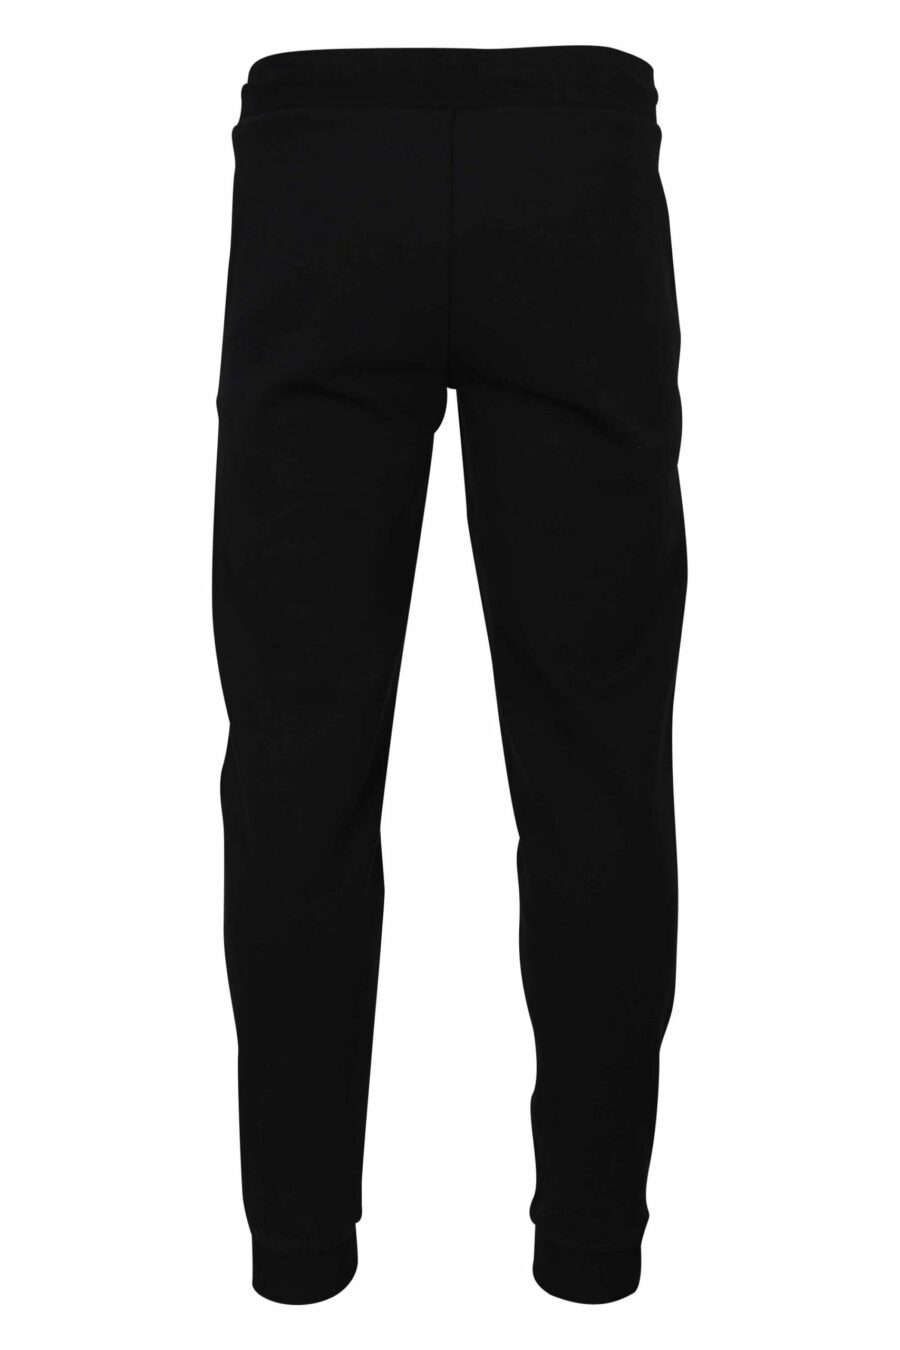 Tracksuit bottoms black with white "lux identity" minilogue on black badge - 8057970666158 1 scaled